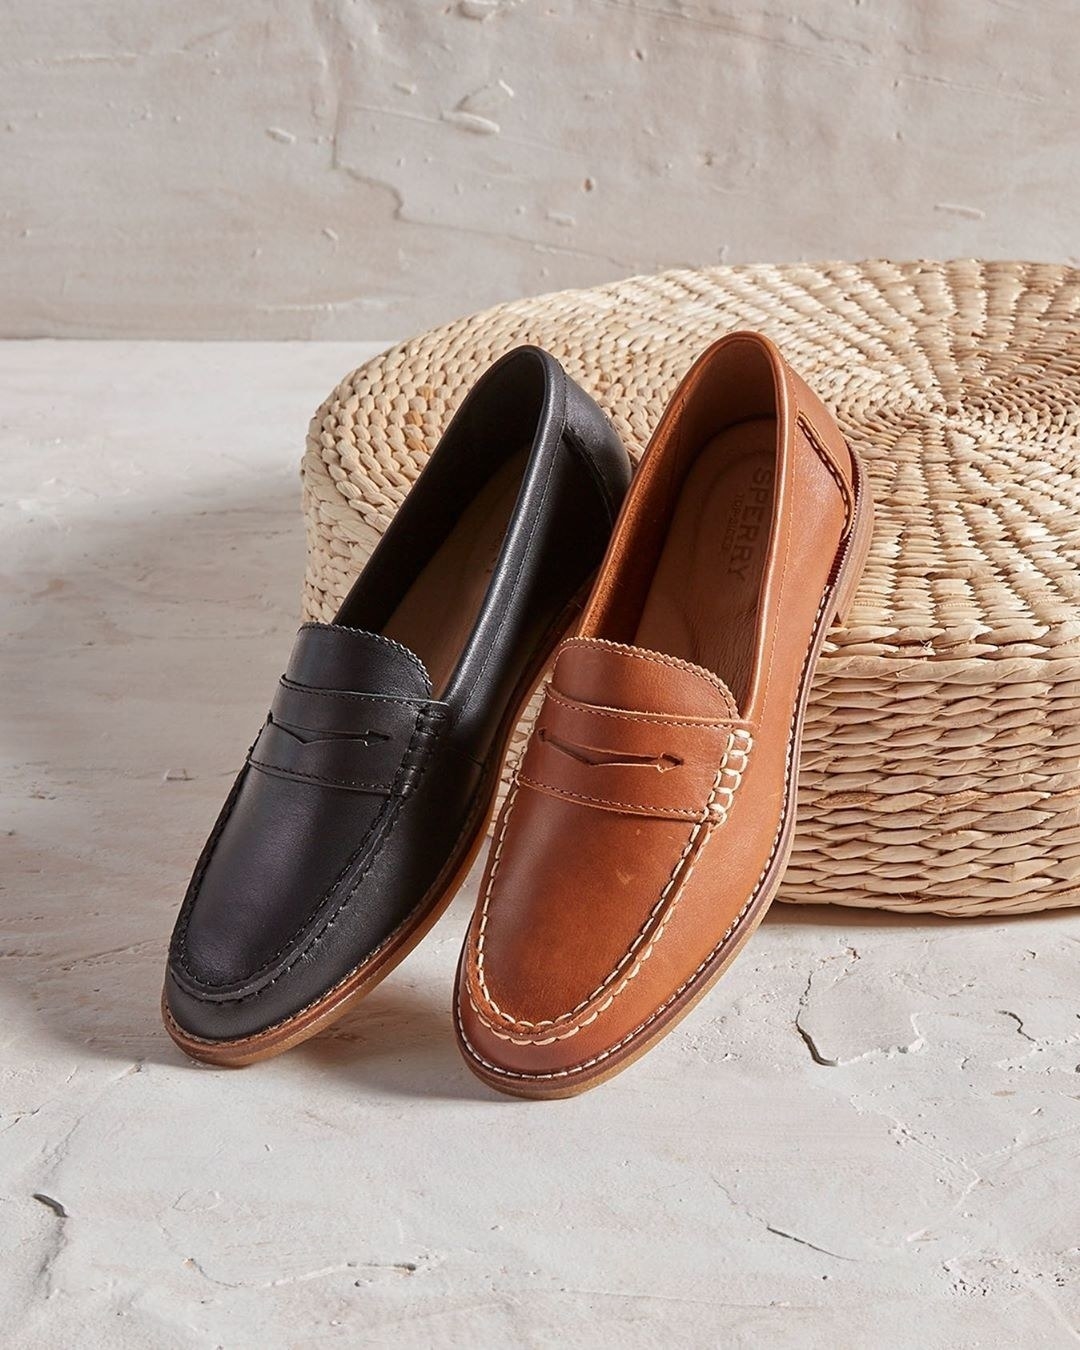 A black loafer and brown loafer sitting next to each other